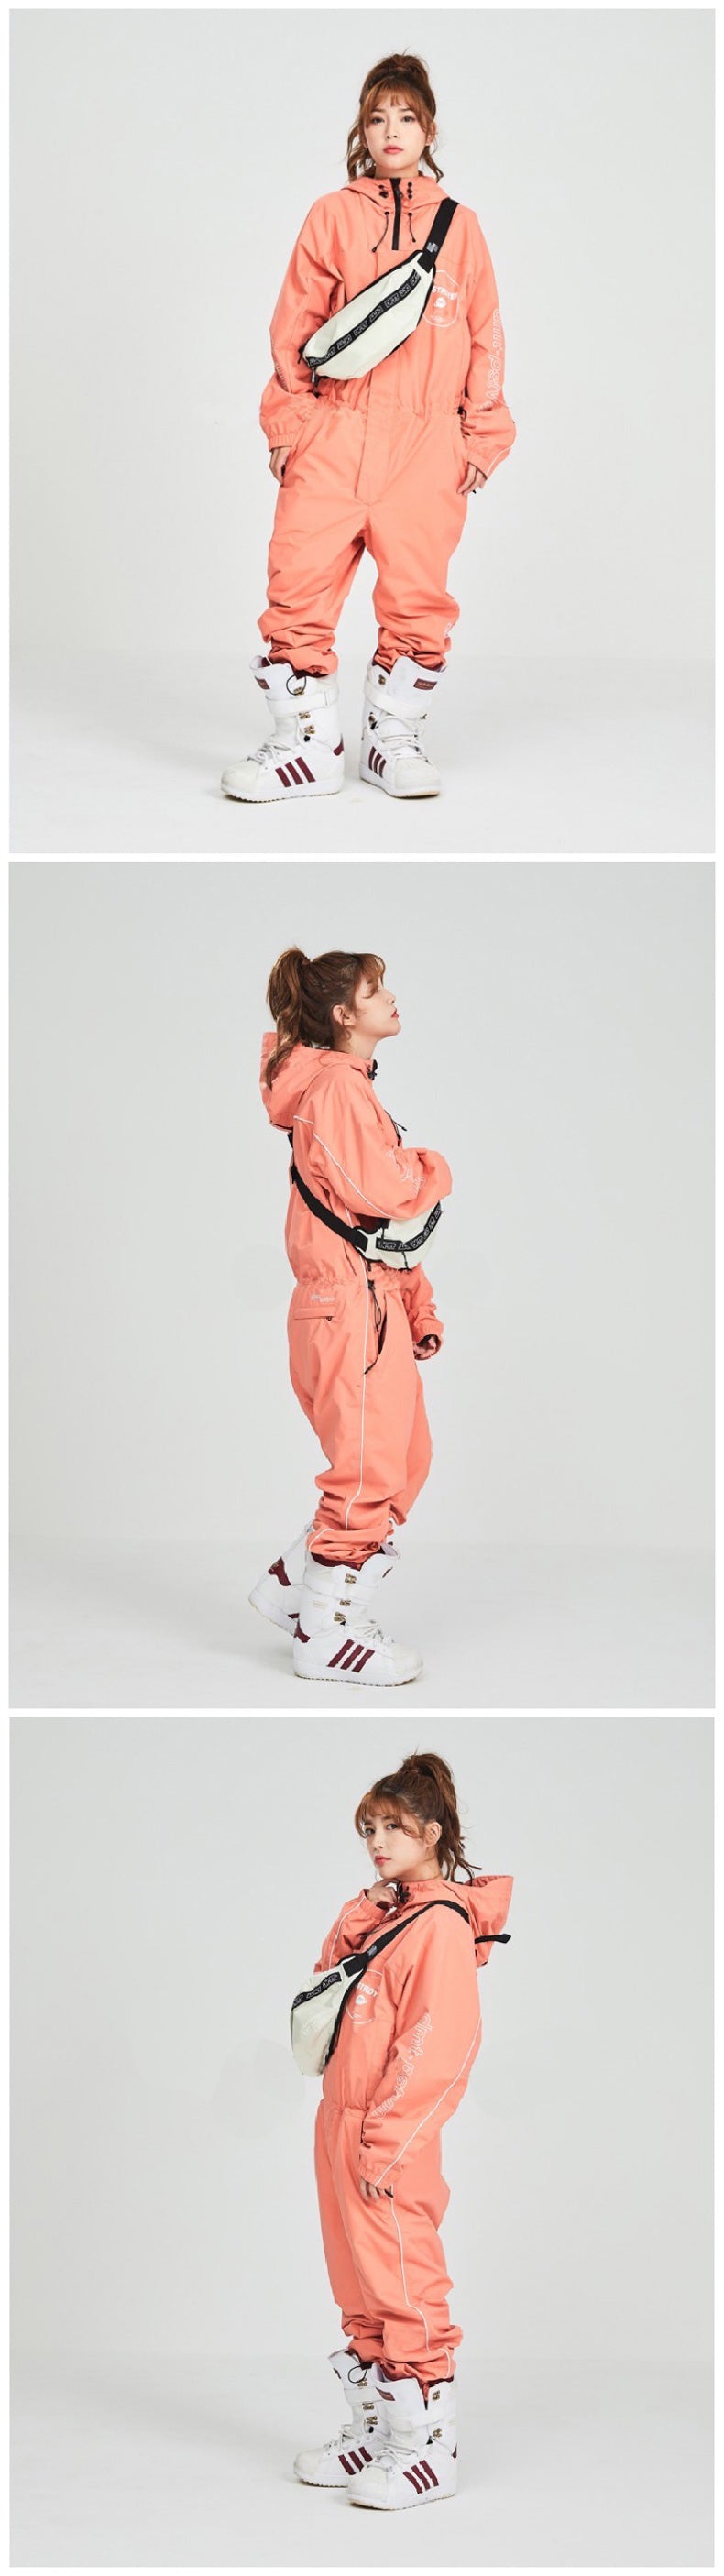 DMT Winter Dope Style Outdoor One Piece Snow Suits Ski Jumpsuit